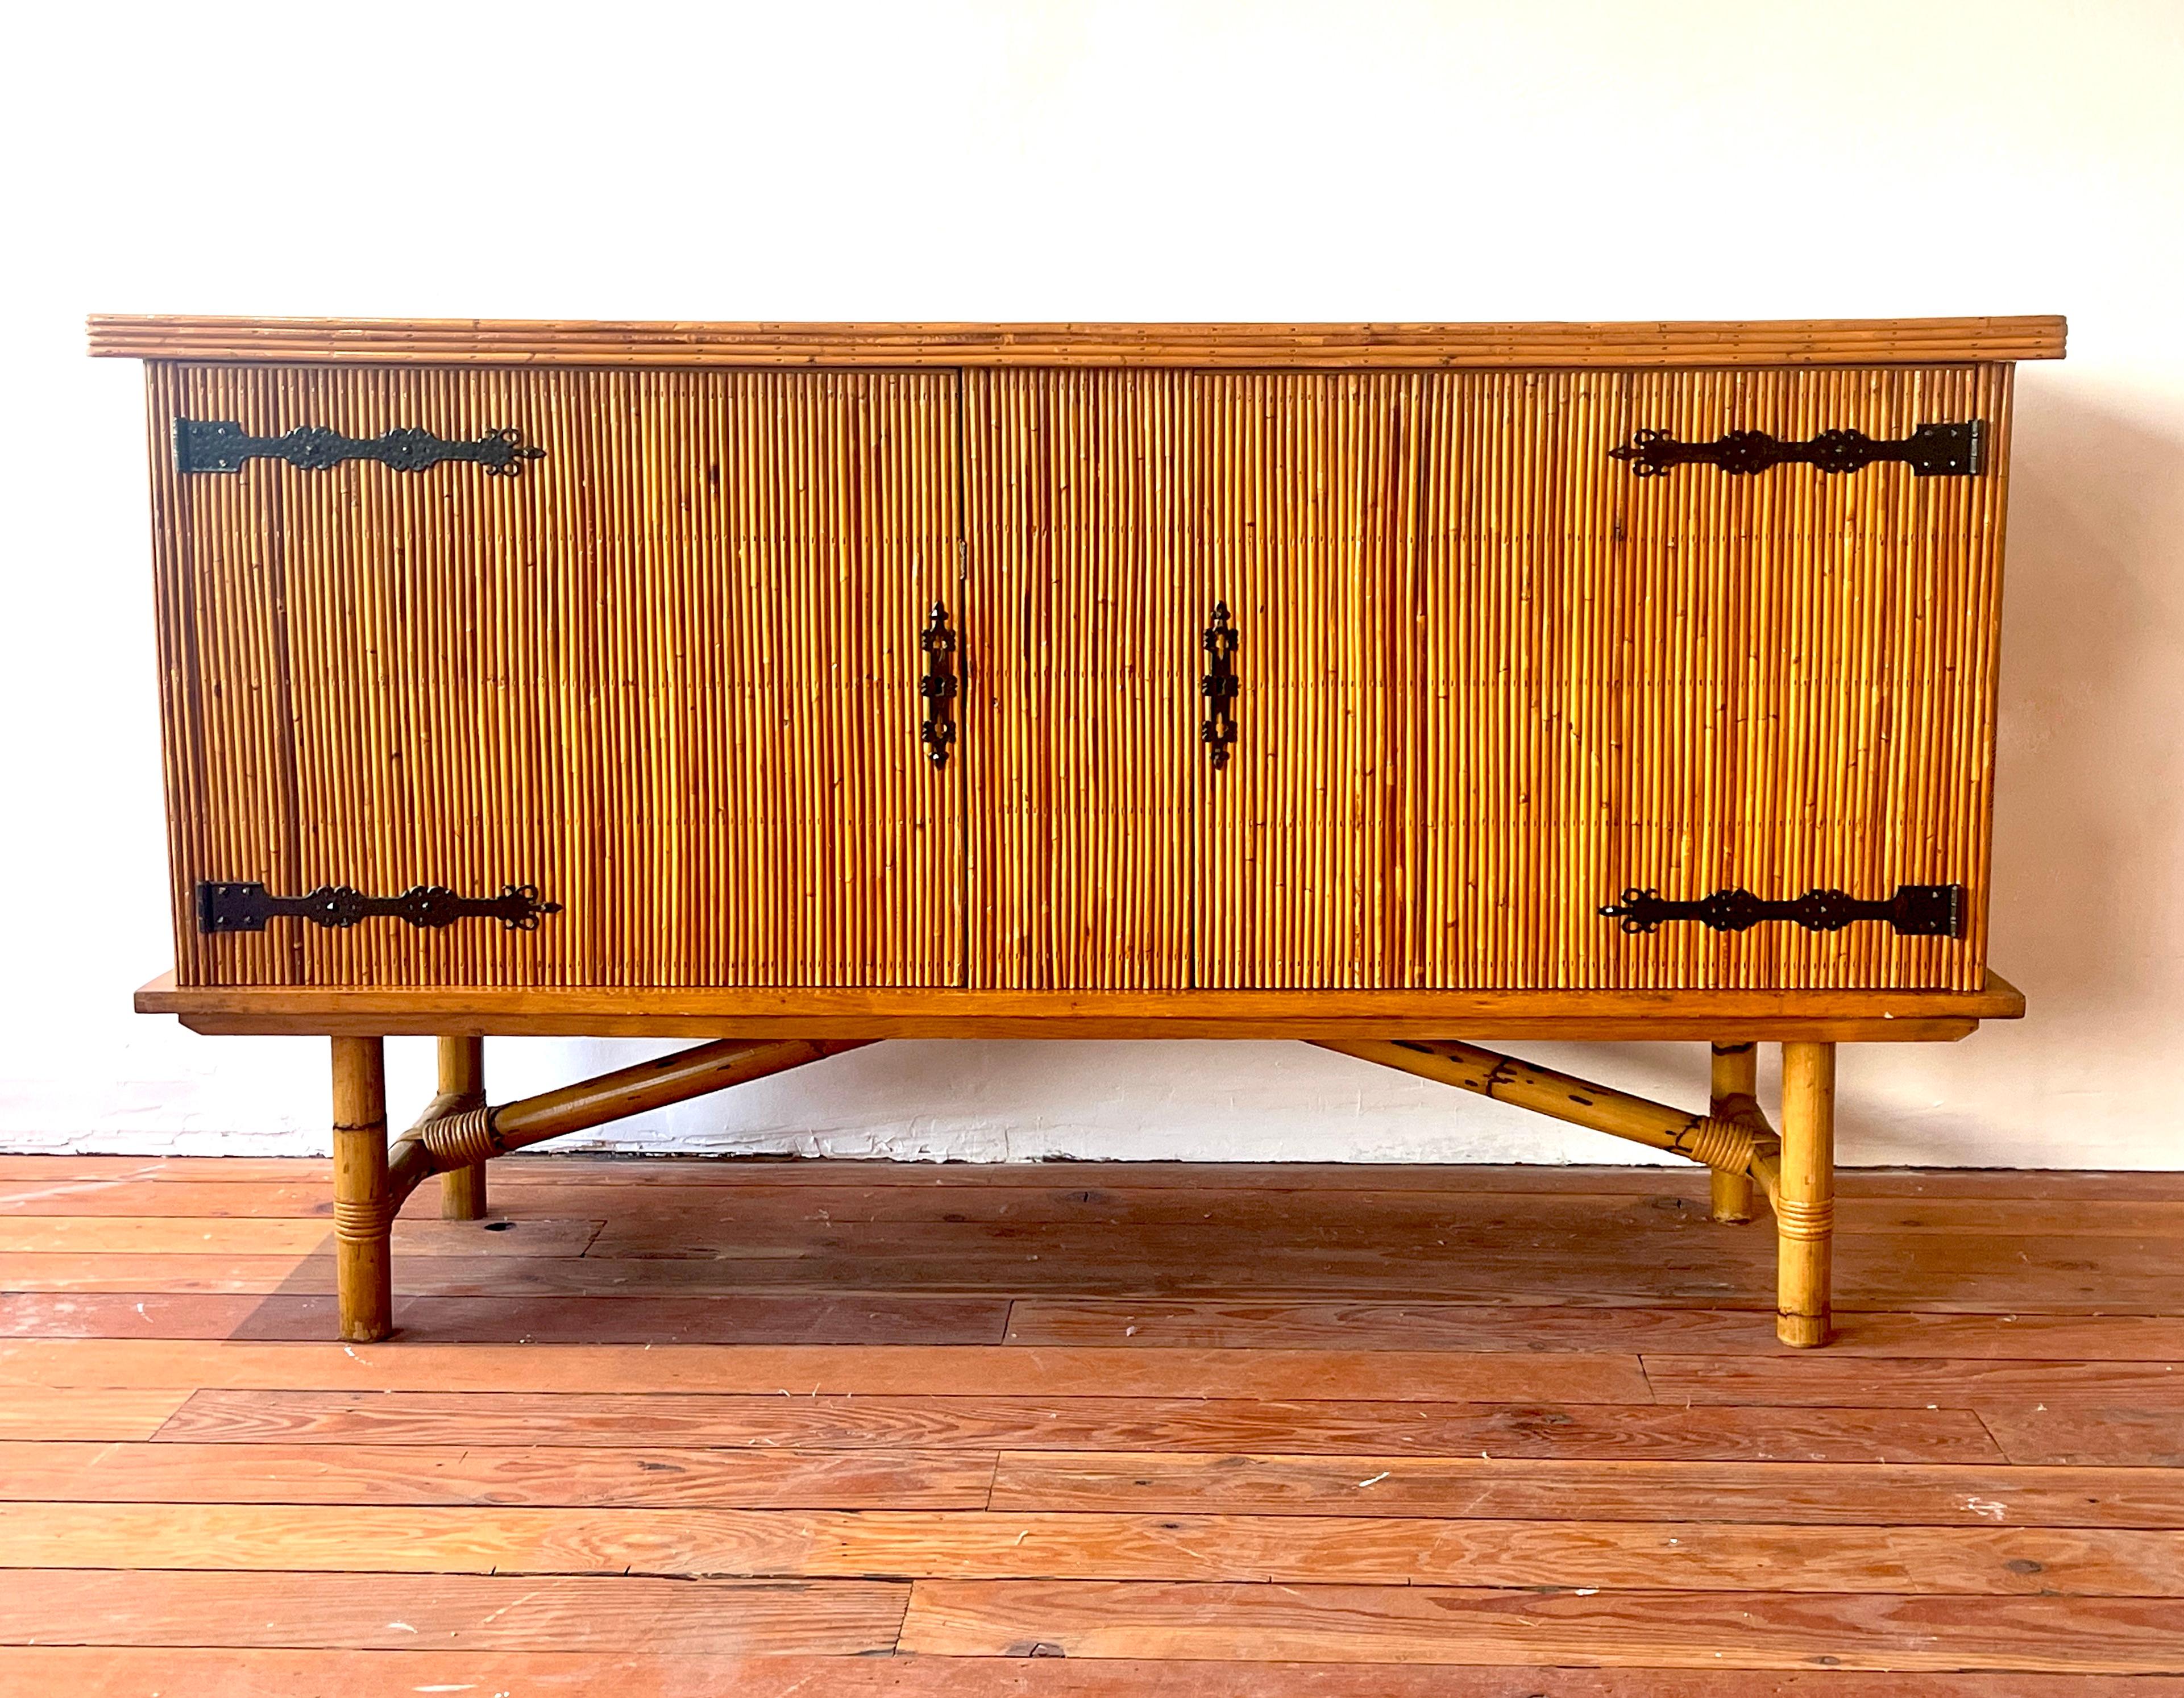 French bamboo sideboard with ornate iron hardware attributed to Alien Audoux and Frida Minet, circa 1960's.
Wonderful patina throughout. 